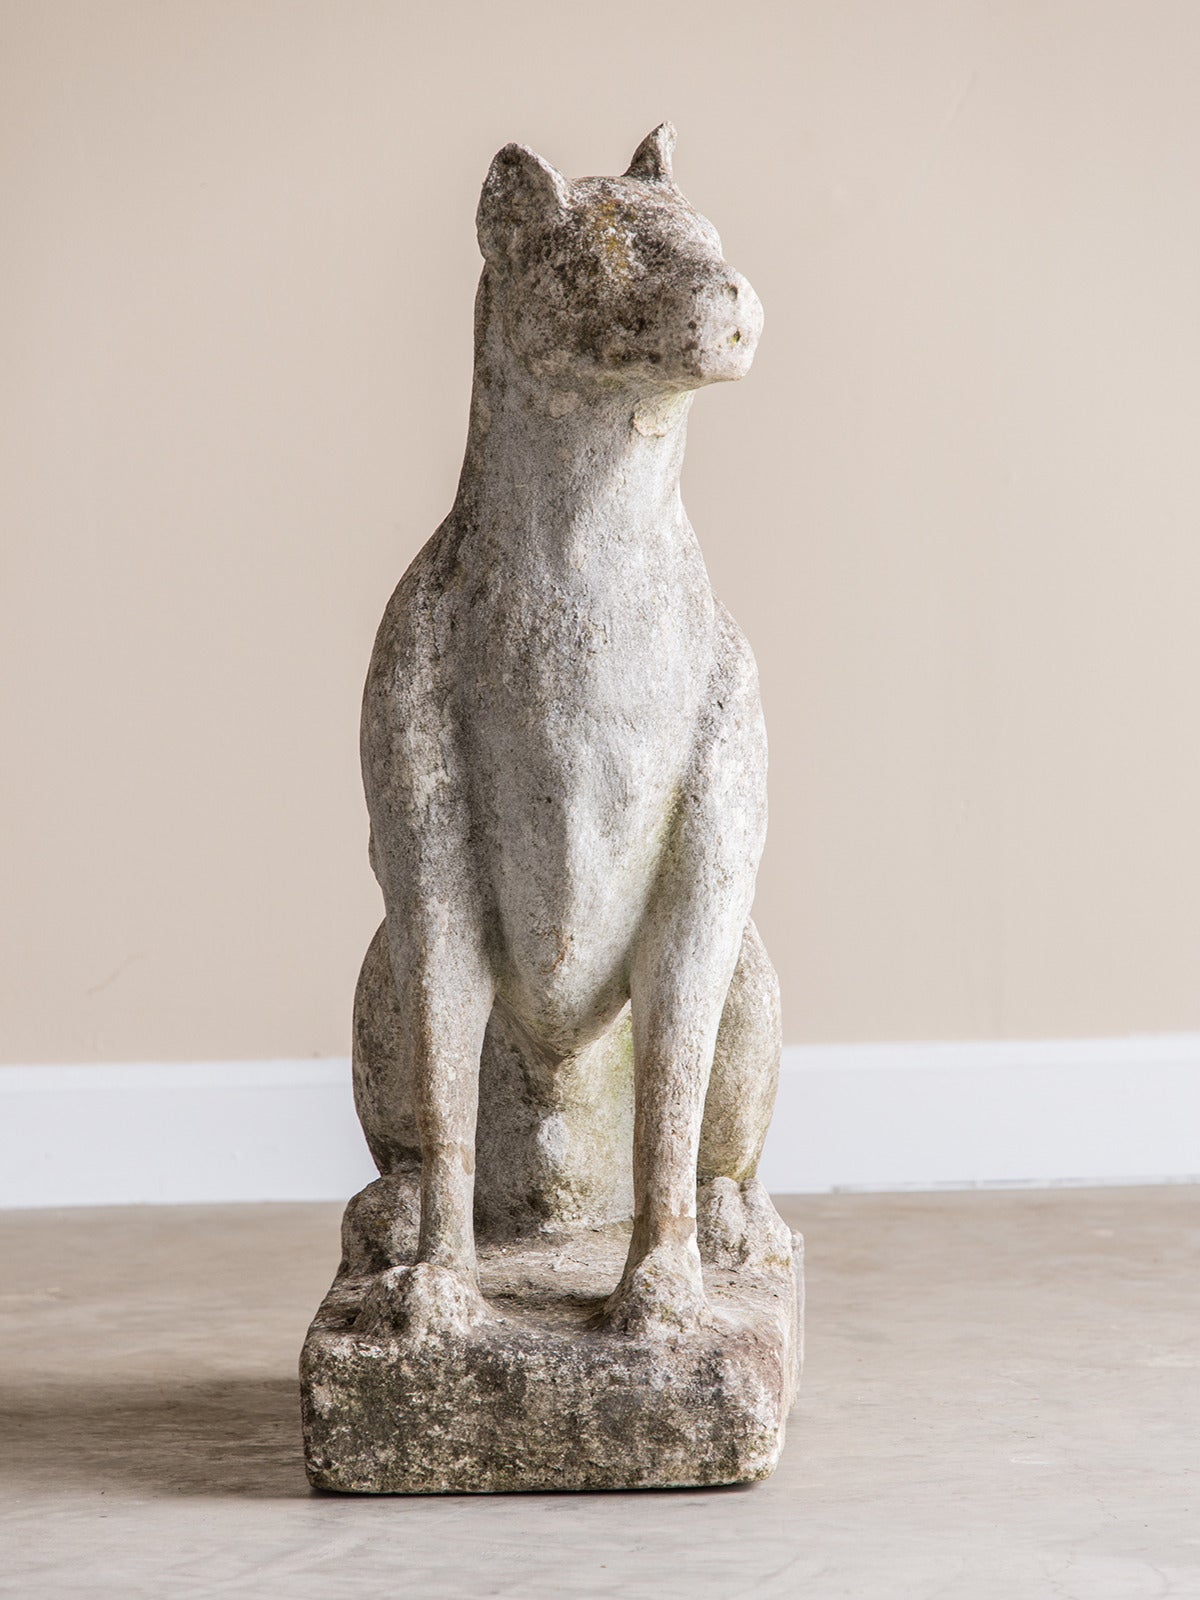 The well modeled proportions of this life size animal give the statue its sense of immediacy and visual impact. Made of reconstituted stone in early twentieth century France this vintage garden statue of a dog, which resembles a Great Dane, is